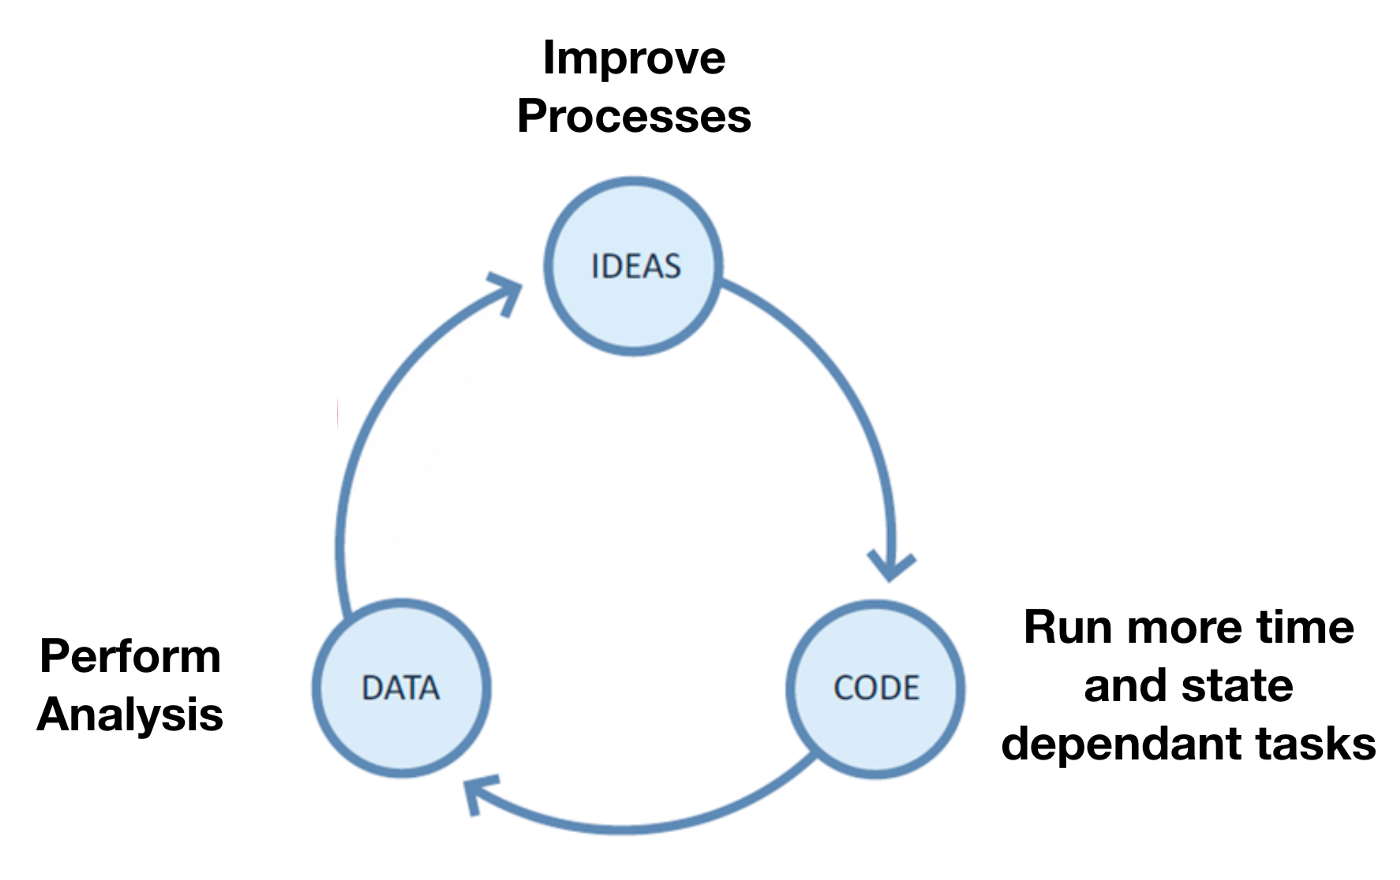 Iteration on processes